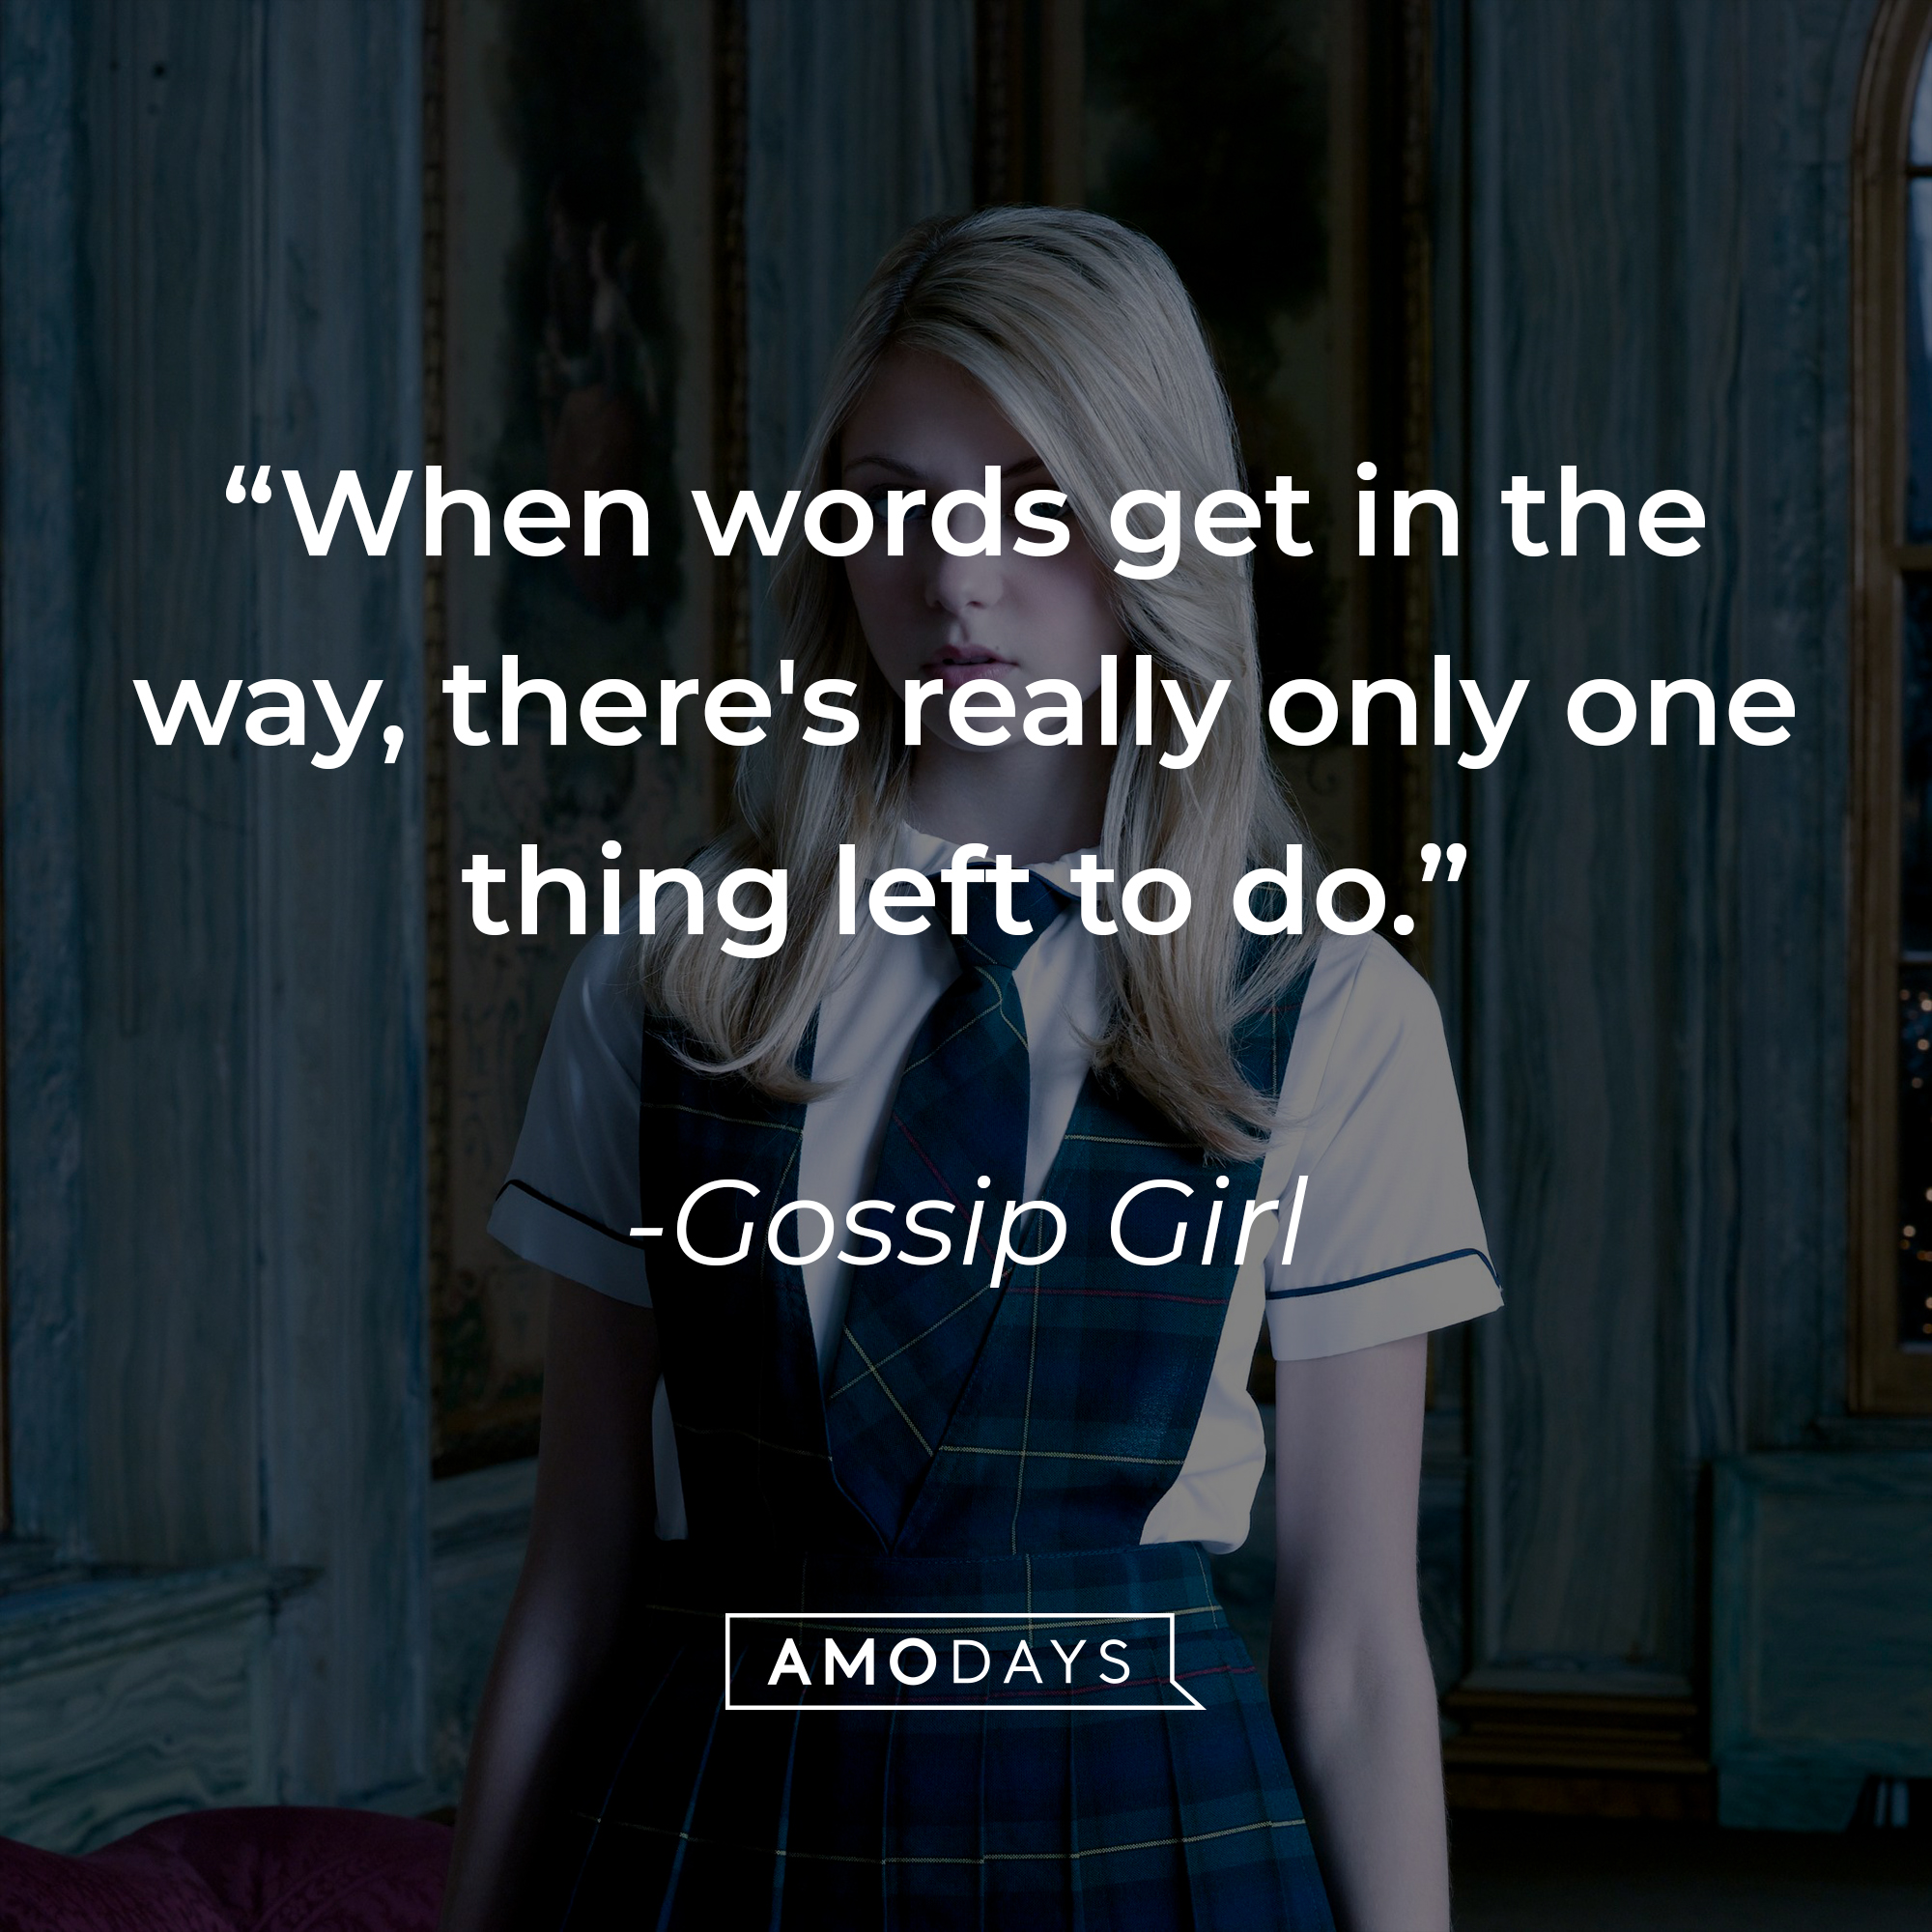 Image from "Gossip Girl" with the quote: "When words get in the way, there's really only one thing left to do." | Source: facebook.com/GossipGirl